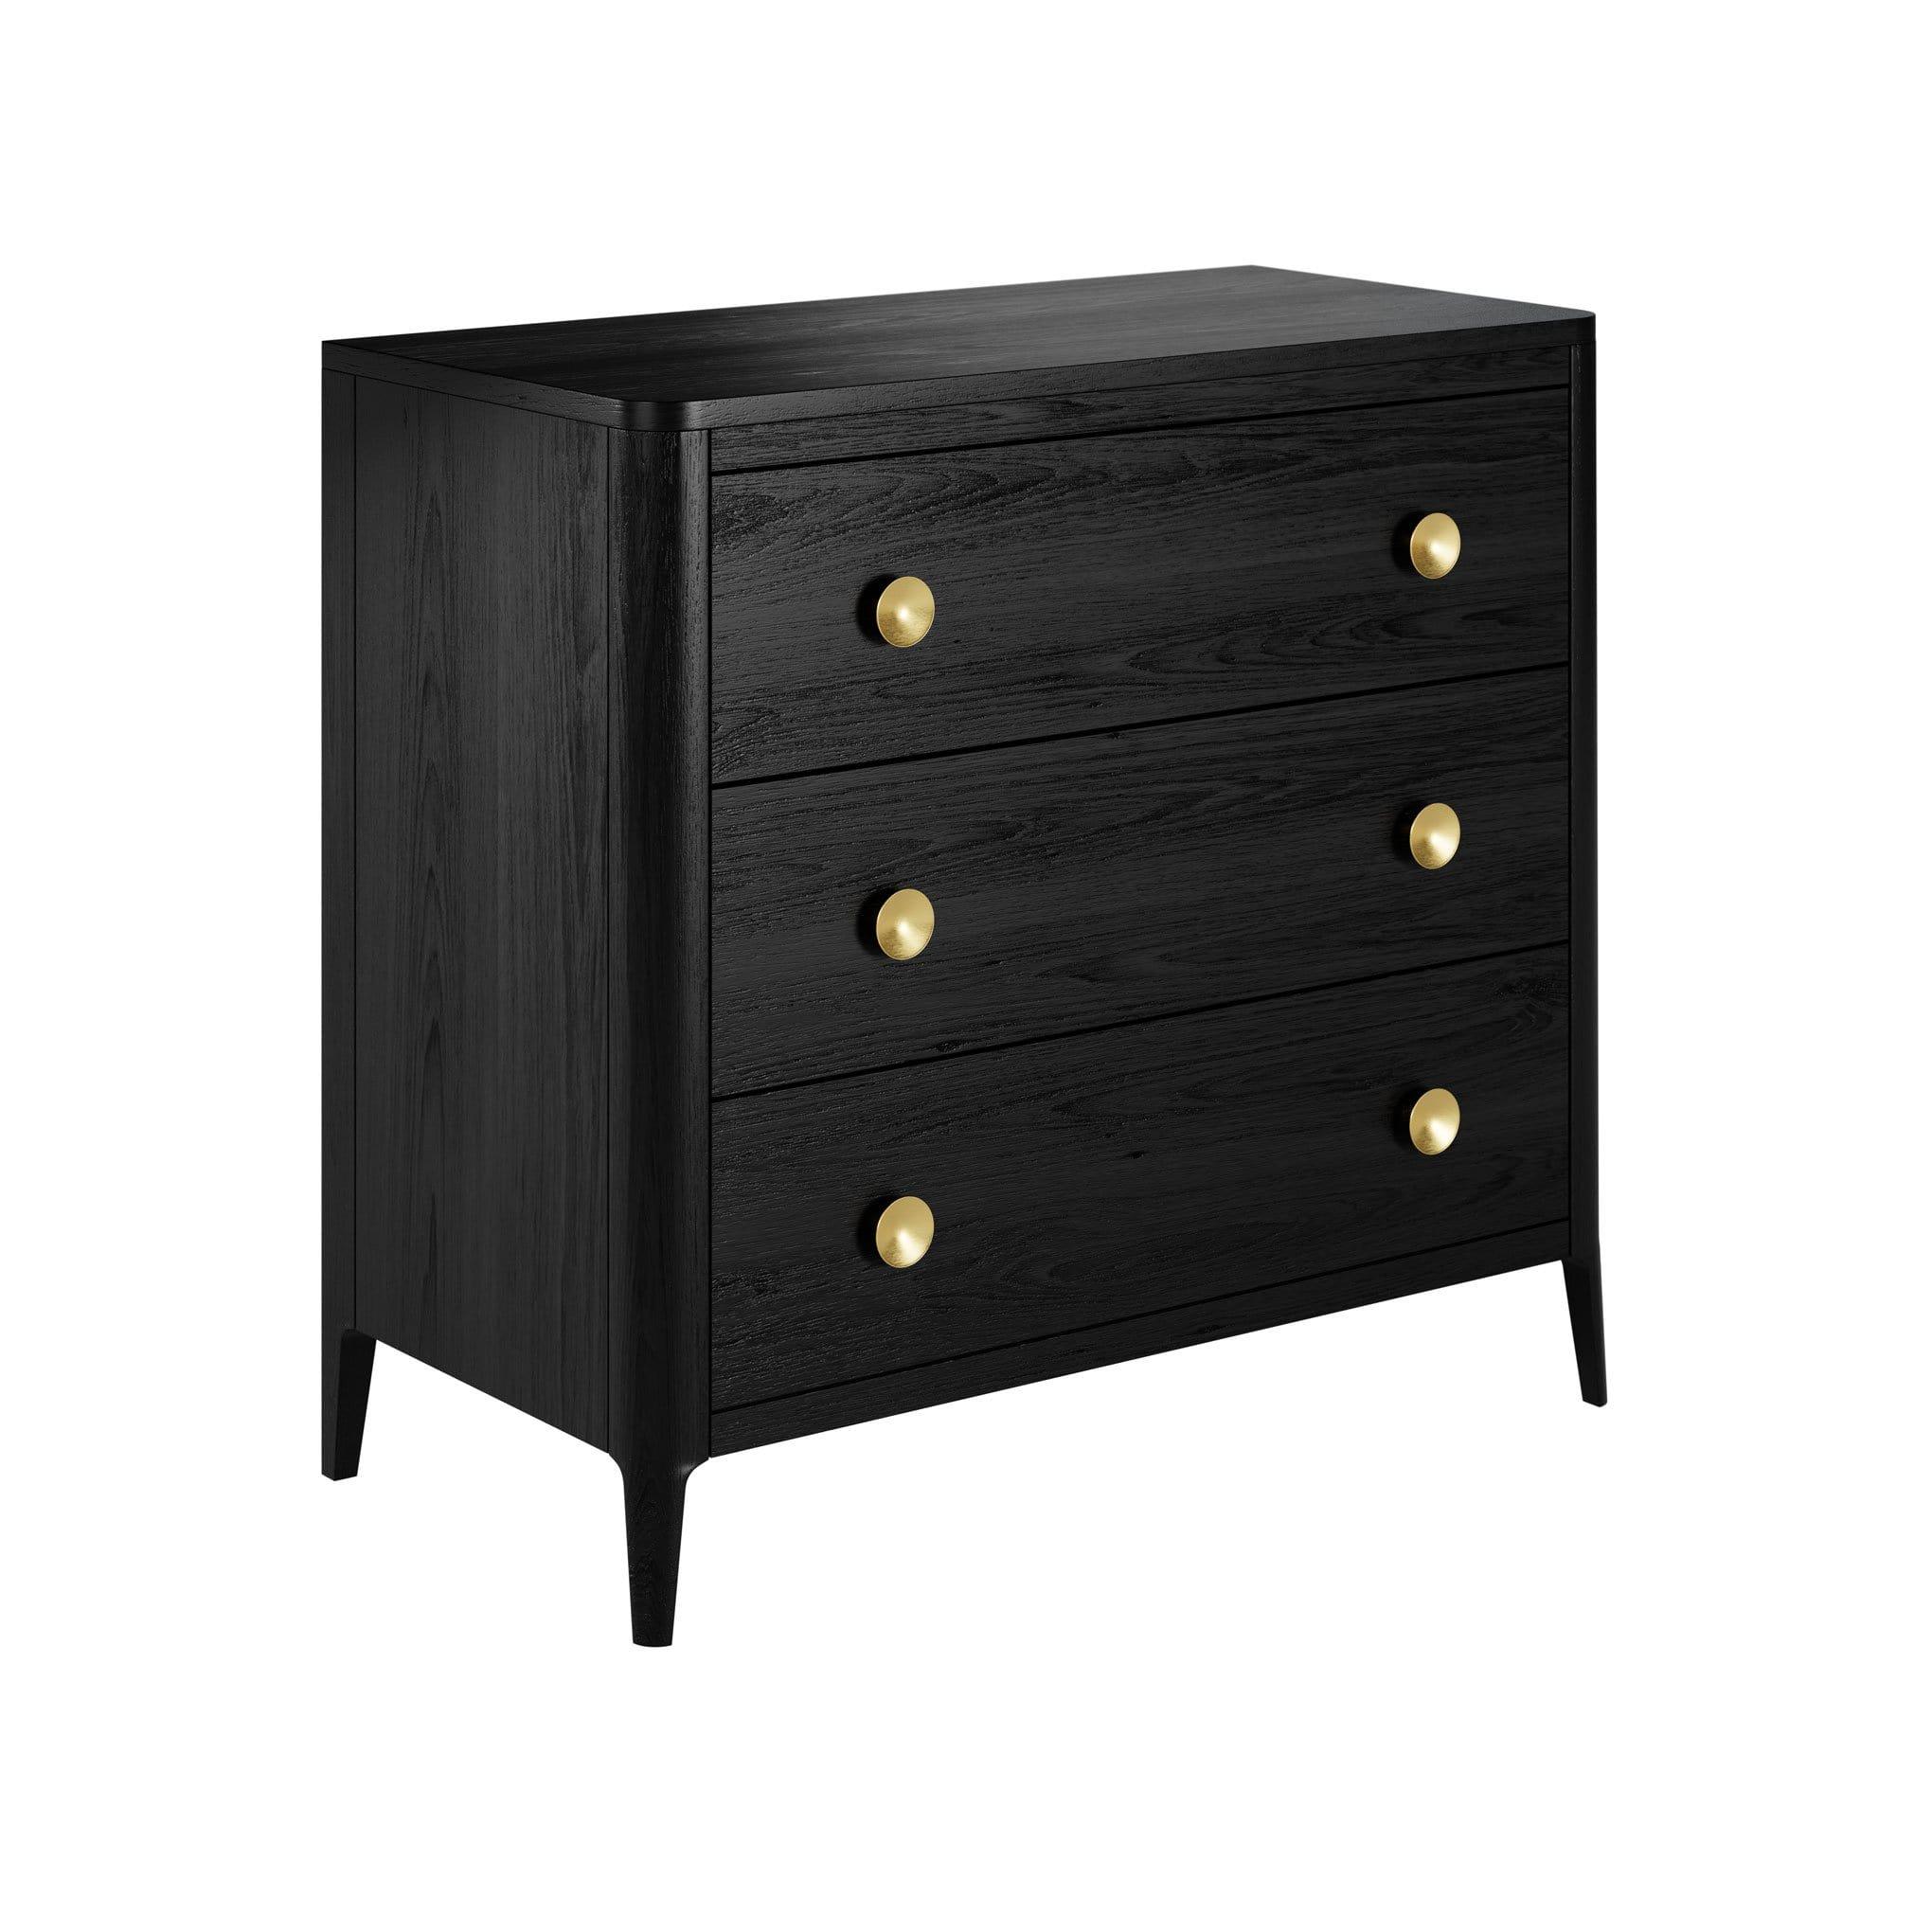 Abberley Chest of Drawers - Black by DI Designs - Maison Rêves UK